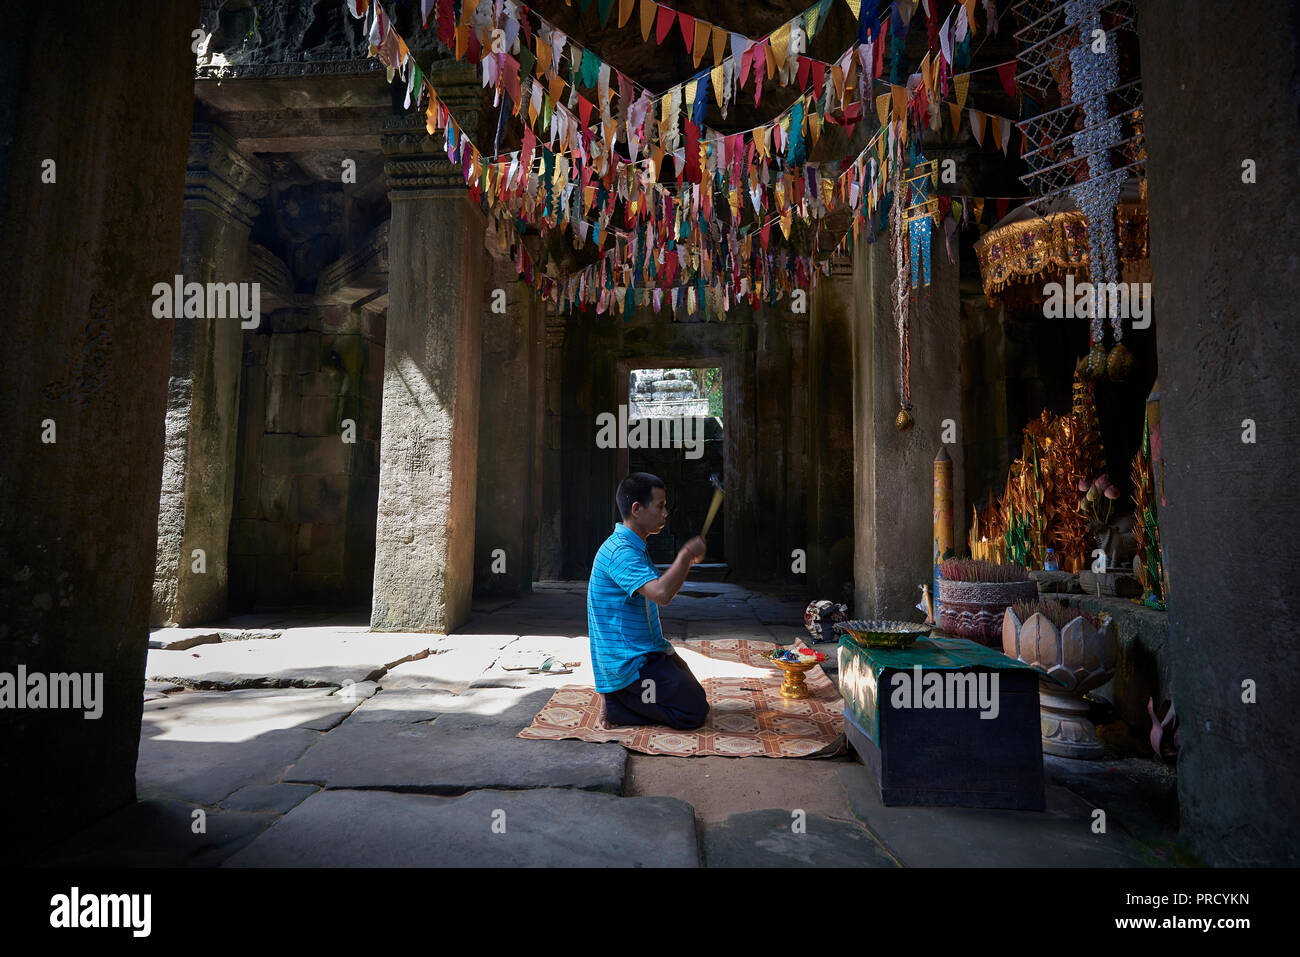 Man praying with incenses inside temple in Angkor Wat. The Angkor Wat complex, Built during the Khmer Empire age, located in Siem Reap, Cambodia, is t Stock Photo